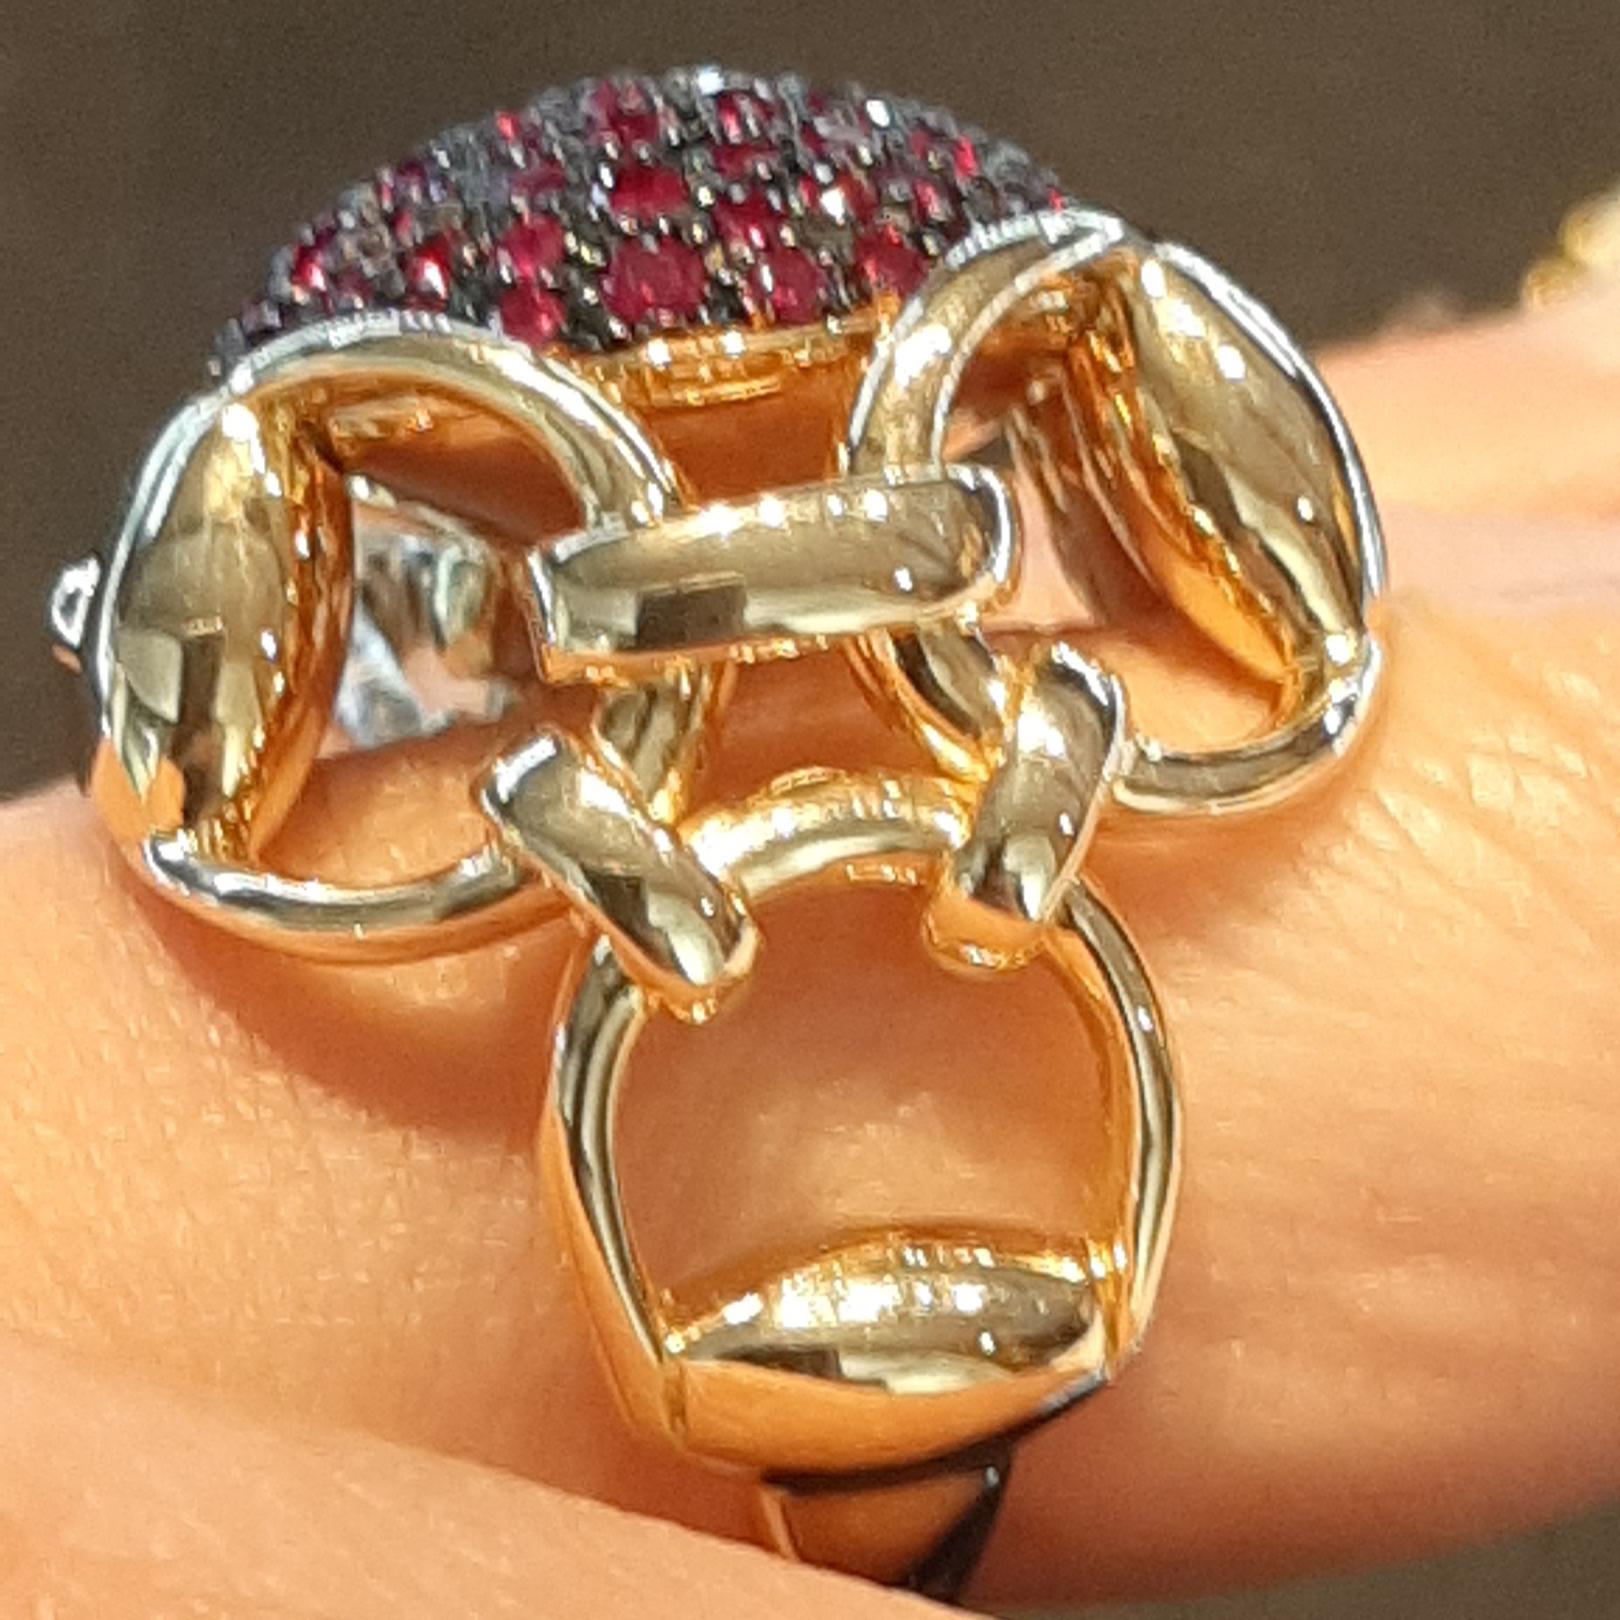 Women's Gucci Horsebit Equestrian 18k Gold Cocktail Ring with Pink Sapphires